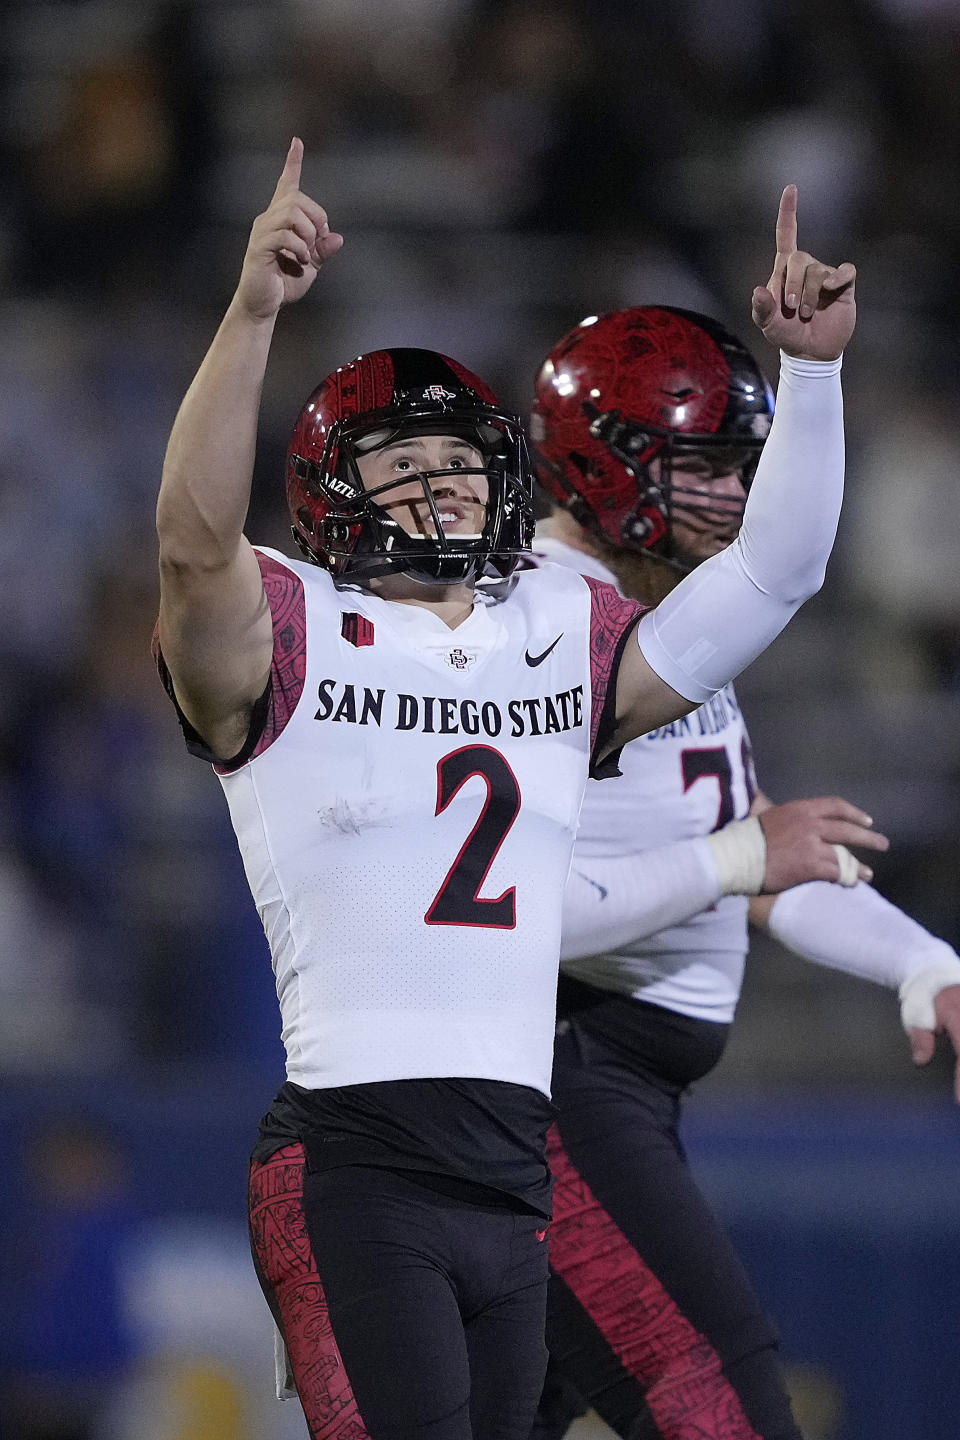 FILE - San Diego State's Matt Araiza (2) celebrates his field goal against San Jose State during the first half of an NCAA college football game Friday, Oct. 15, 2021, in San Jose, Calif. Araiza is unquestionably the best player for the No. 19 Aztecs, who will host Utah State in the Mountain West Conference championship game Saturday, Dec. 4, 2021, at their temporary home in Carson, a Los Angeles suburb. Using his powerful left leg, the junior from San Diego is able to completely flip the field for SDSU, which has a strong defense but often struggles on offense. (AP Photo/Tony Avelar, File)